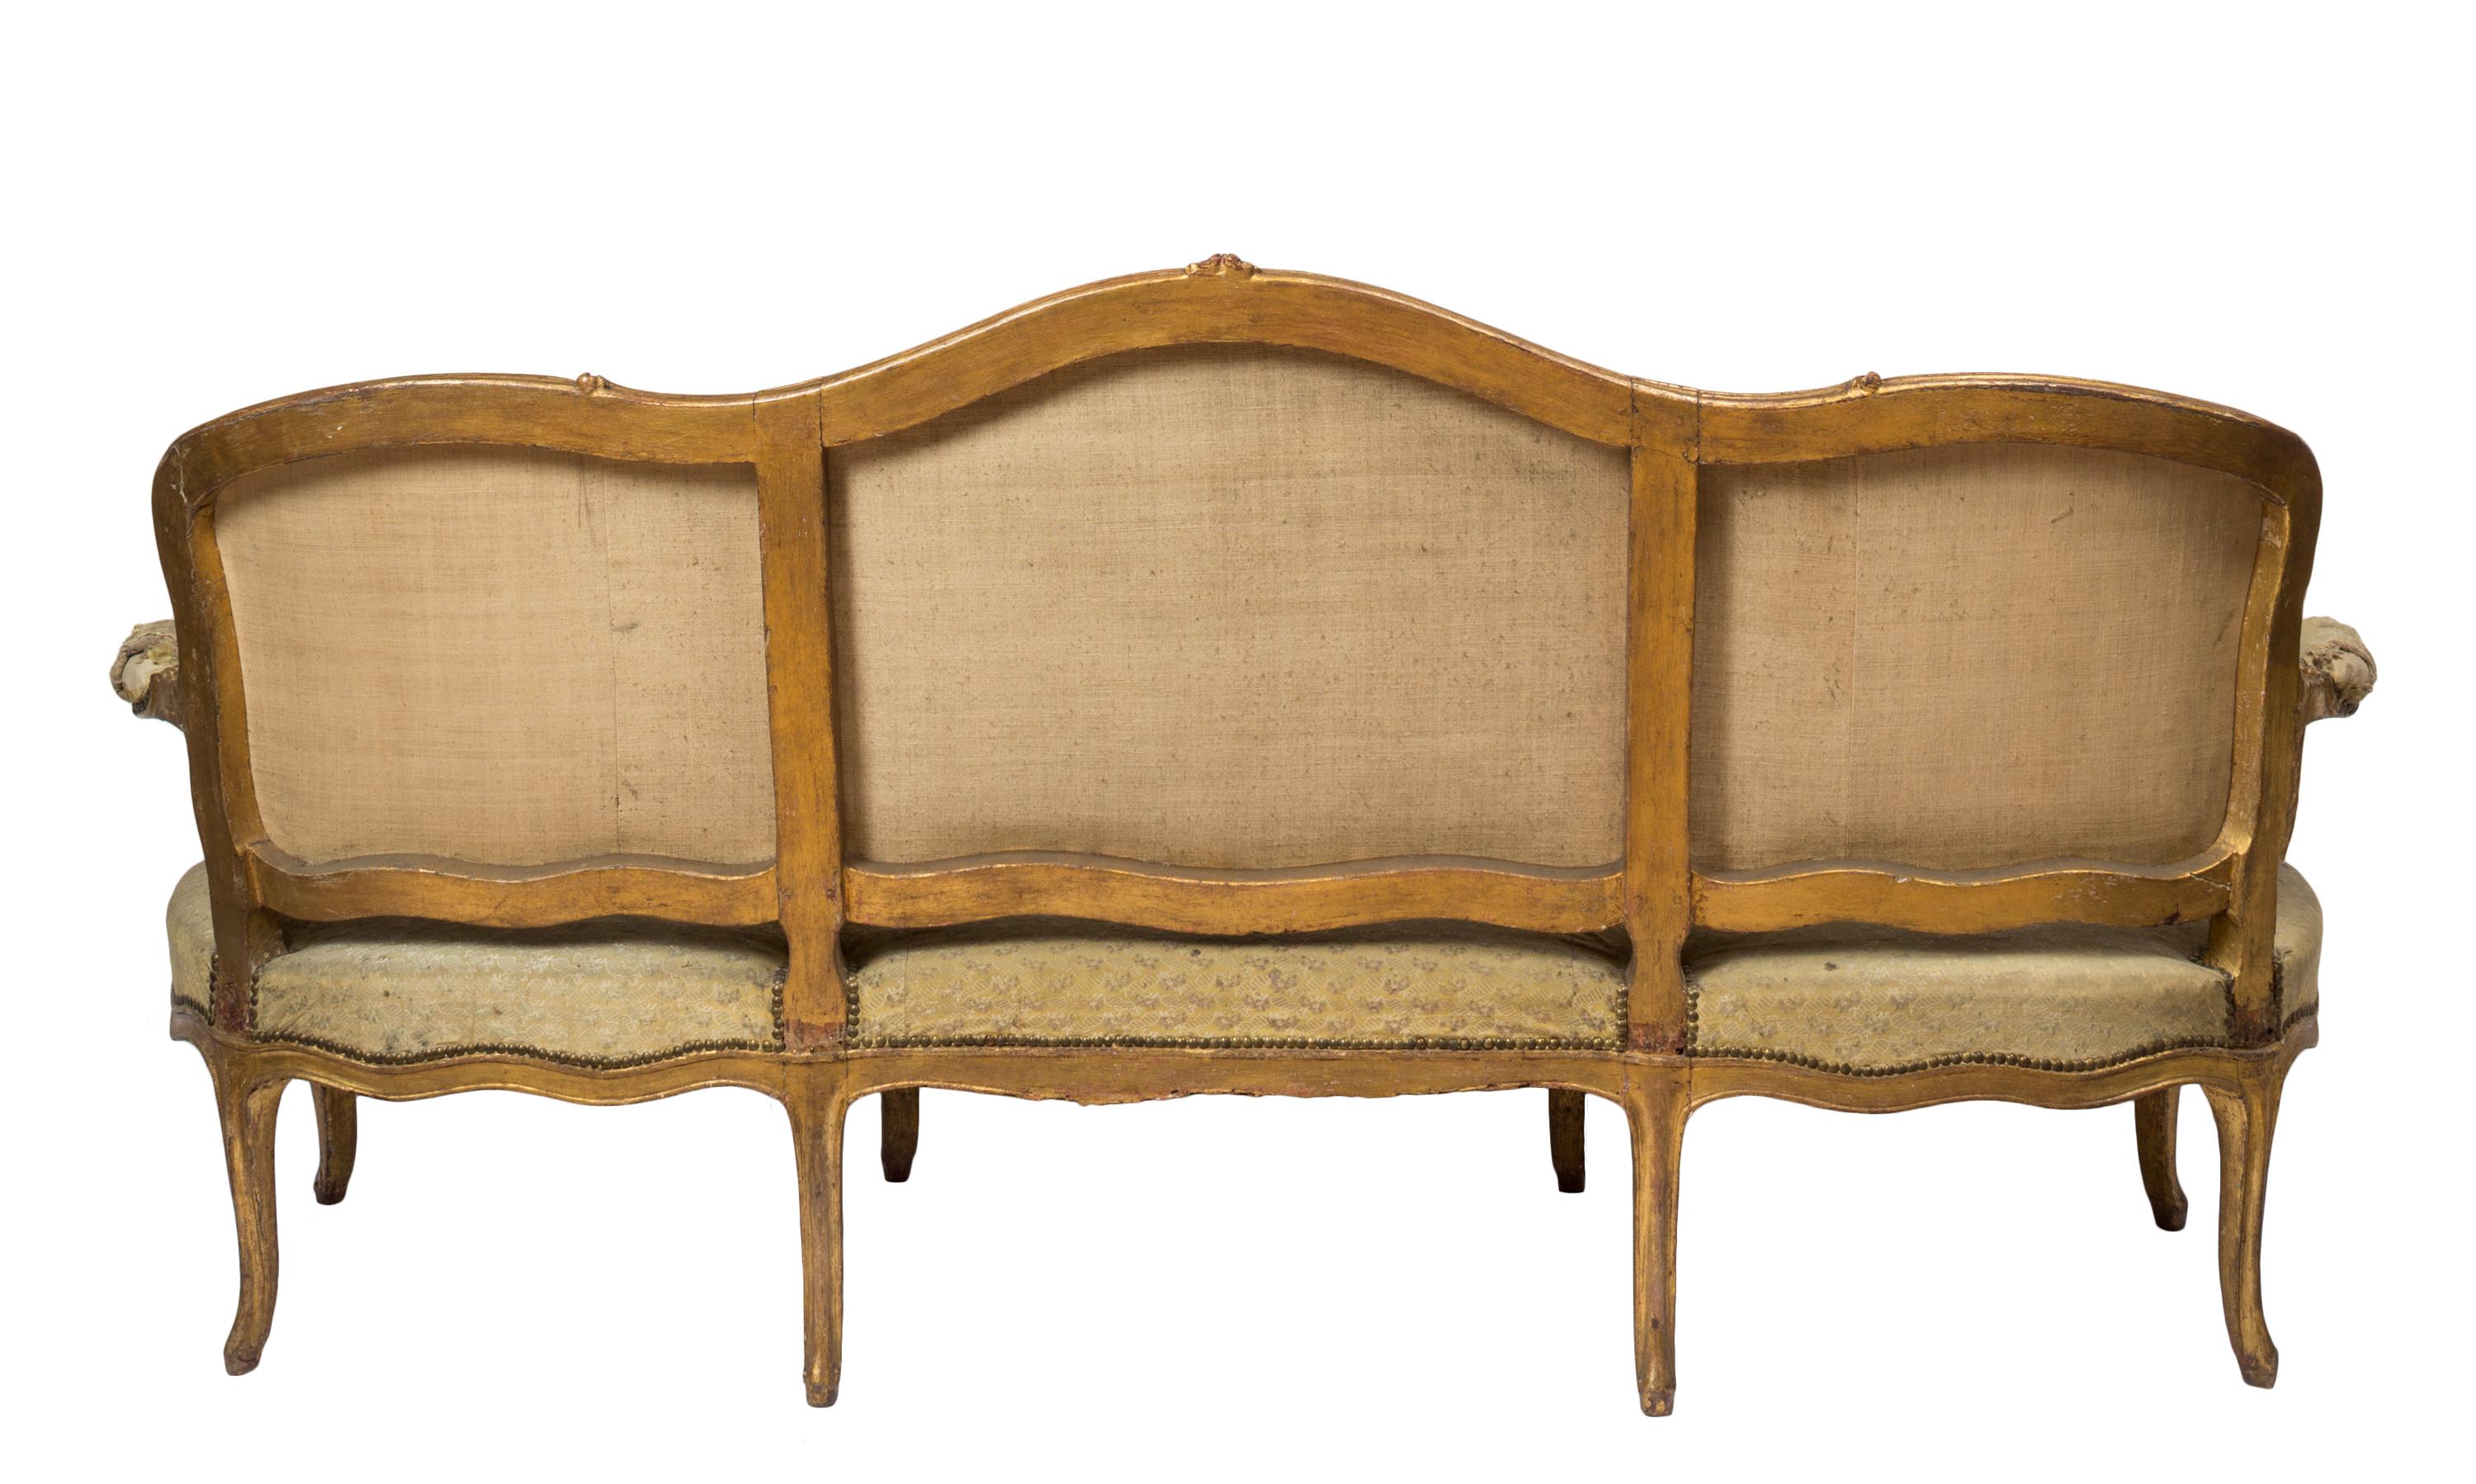 Three piece set, late 18th century French Louis XV canapé / sofa / settee with two matching armchairs. The sofa is able to accommodate three sitters. Unique and noteworthy, all three pieces of this set are upholstered in their original gold colored